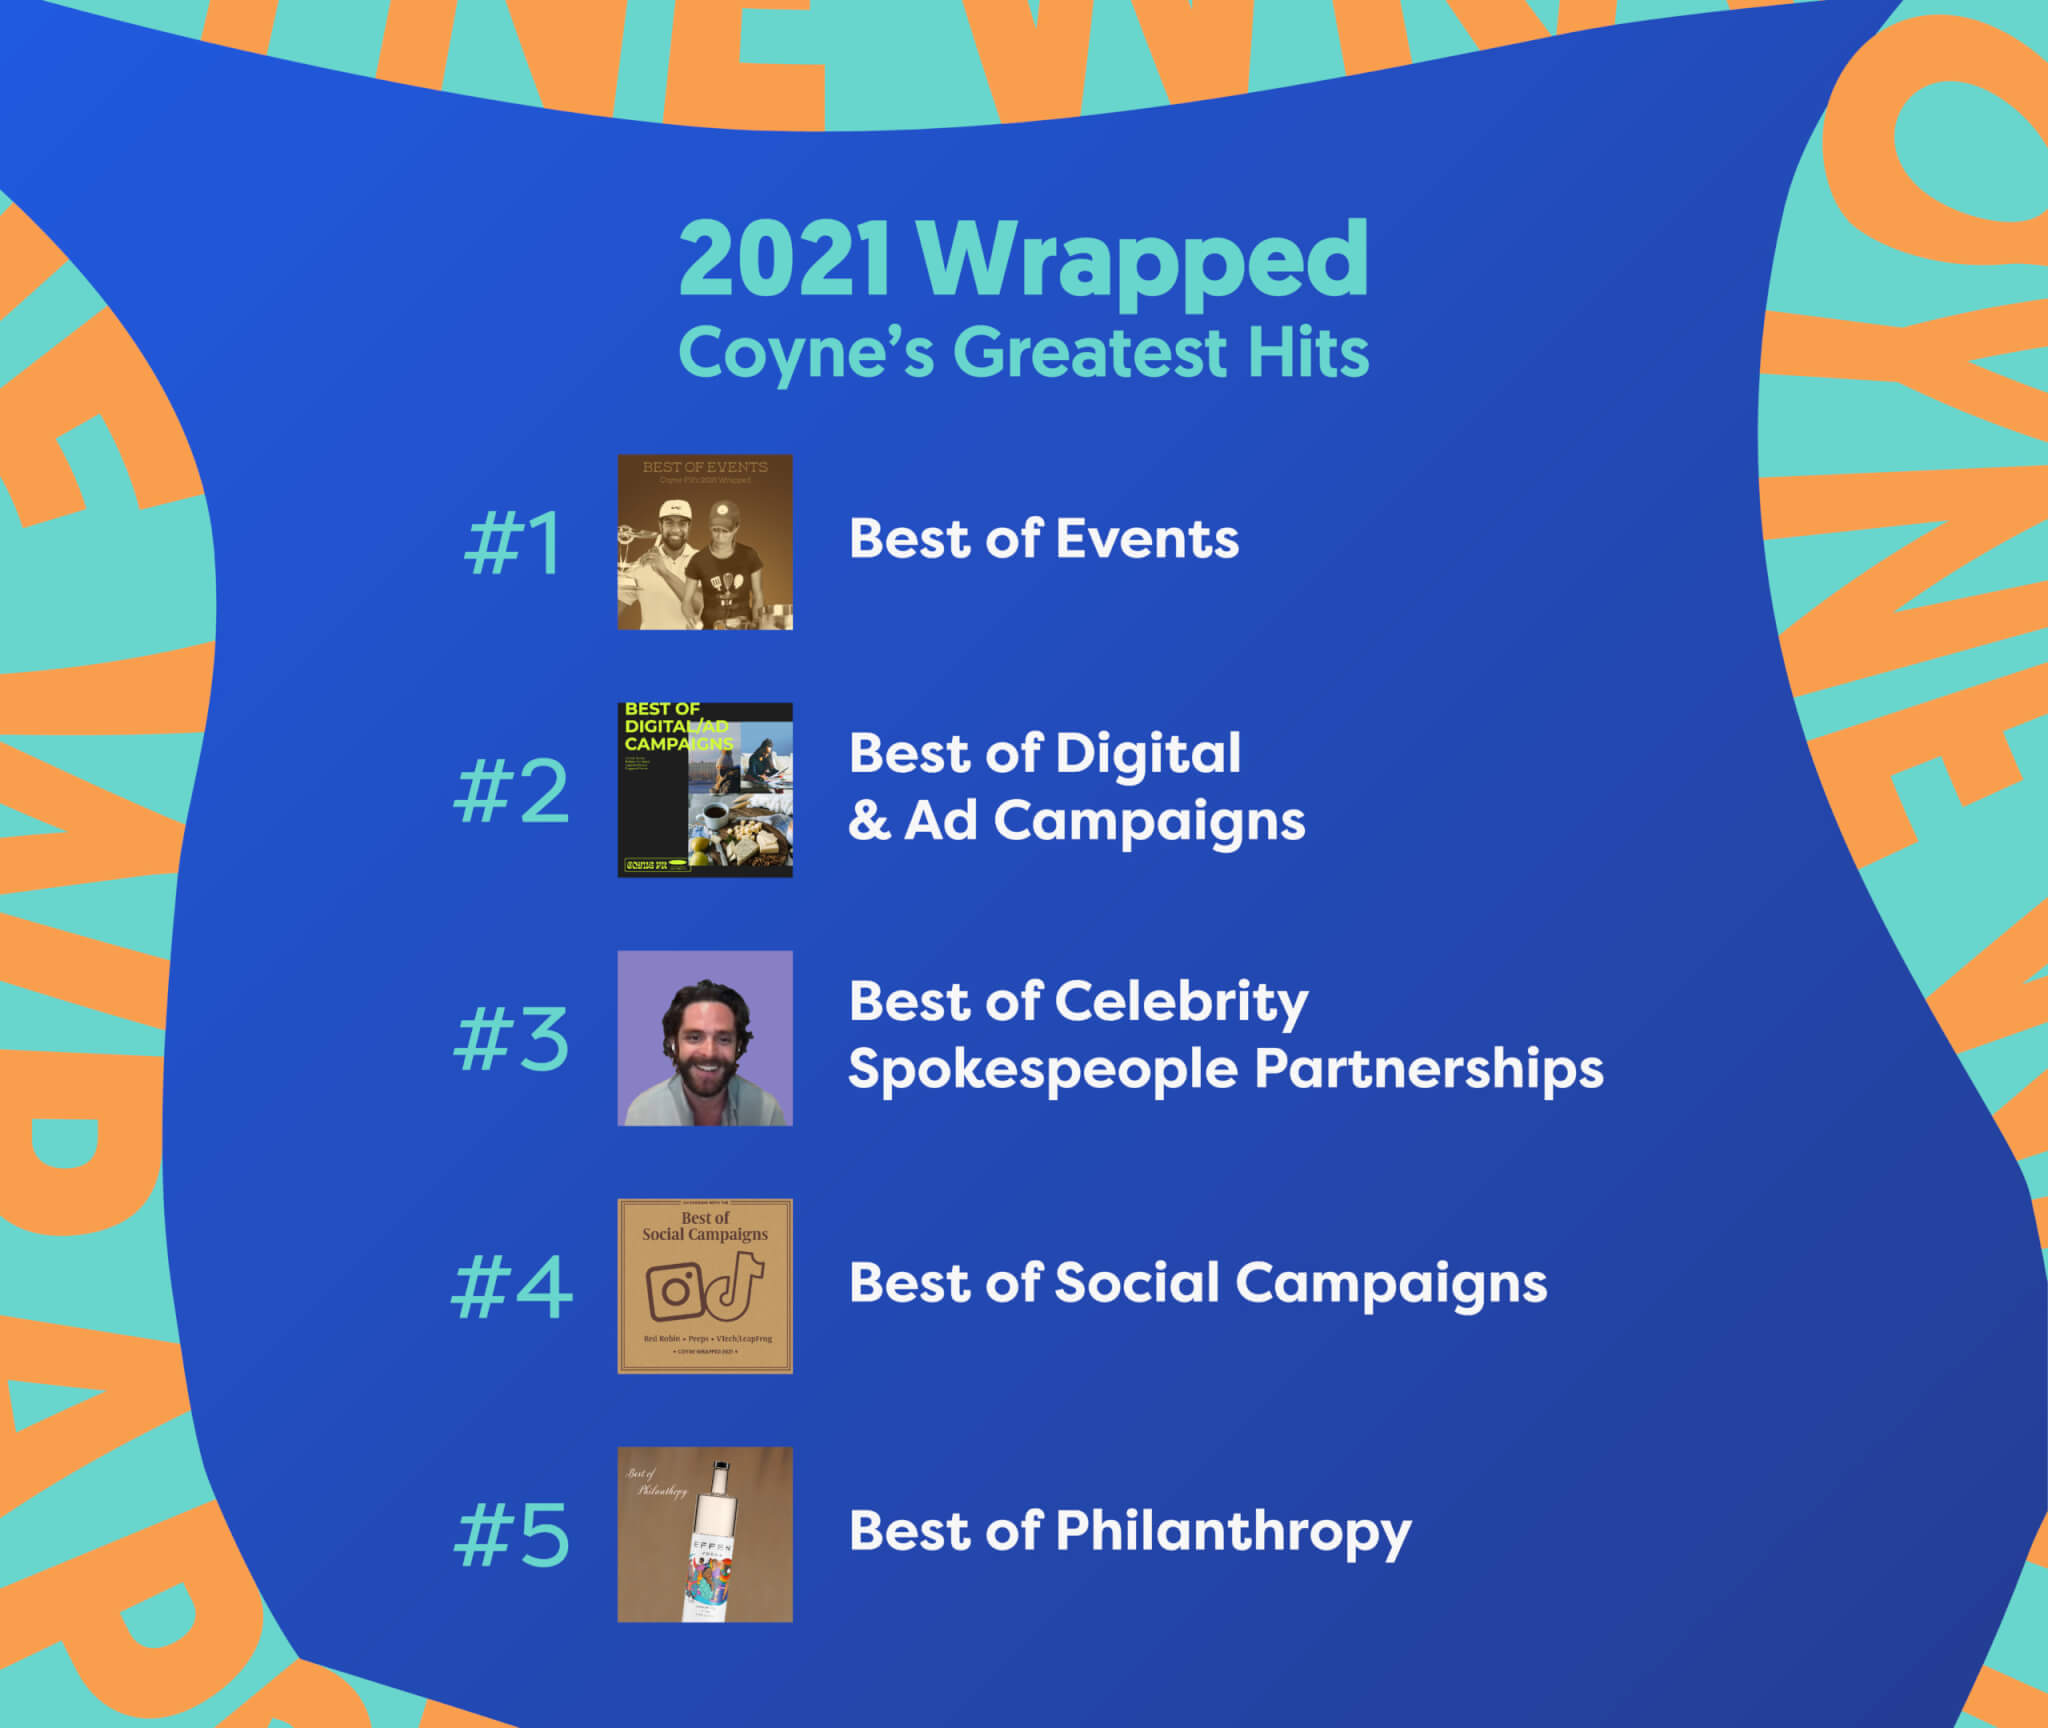 2021 Wrapped: Coyne’s Greatest Hits